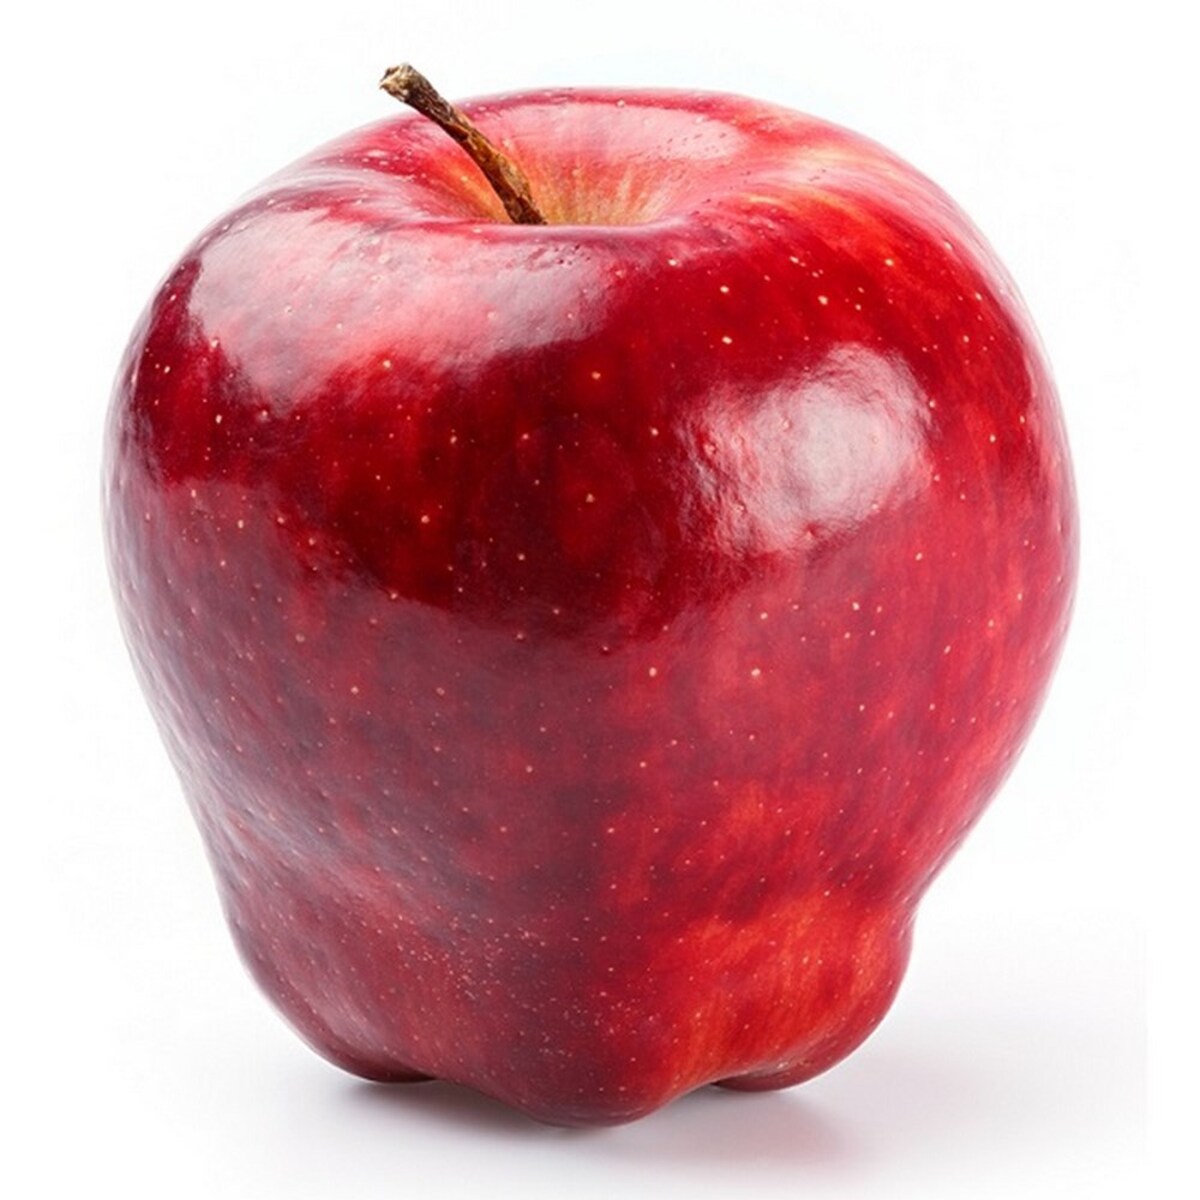 Apple Red USA Approx. 1kg to 1.1kg